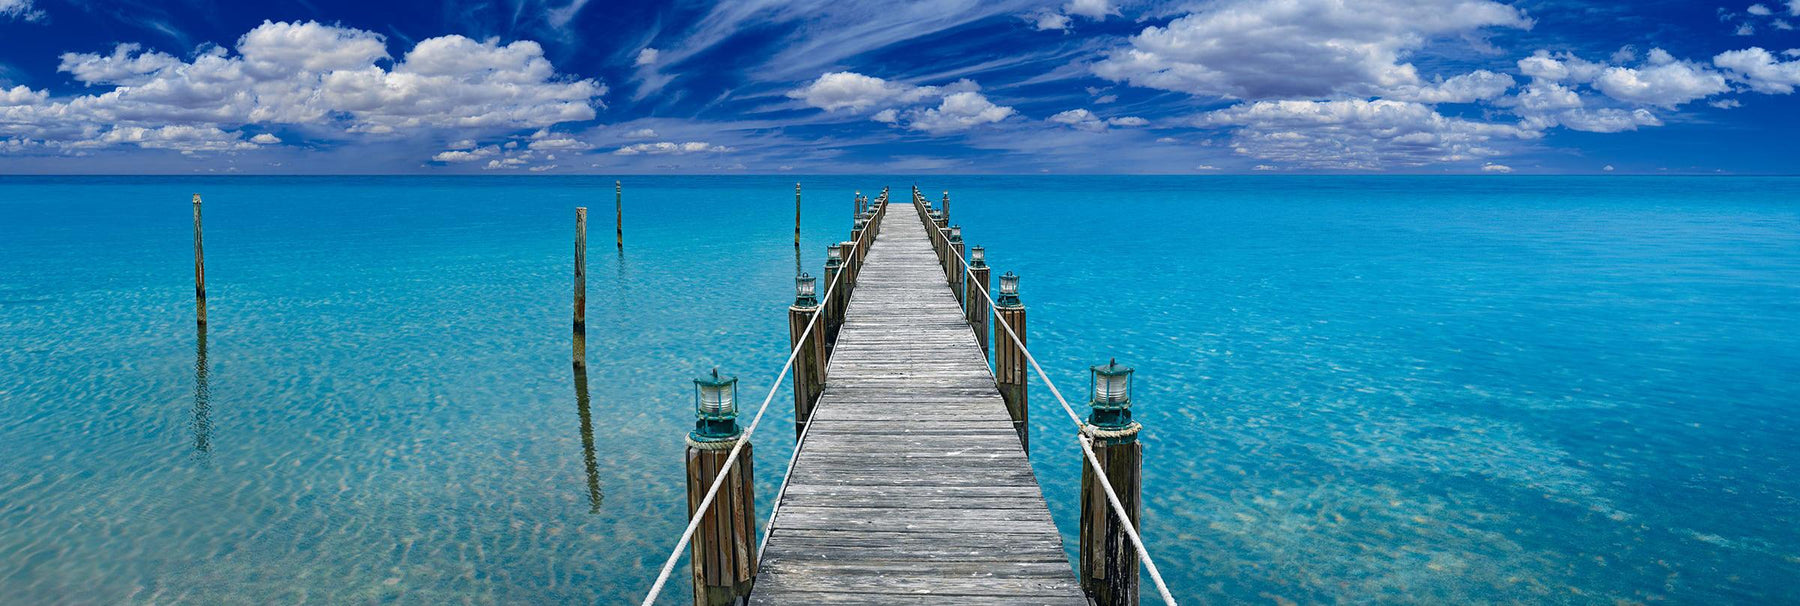 Old wooden jetty with white rope and lanterns leading over a turquoise ocean in Key West Florida